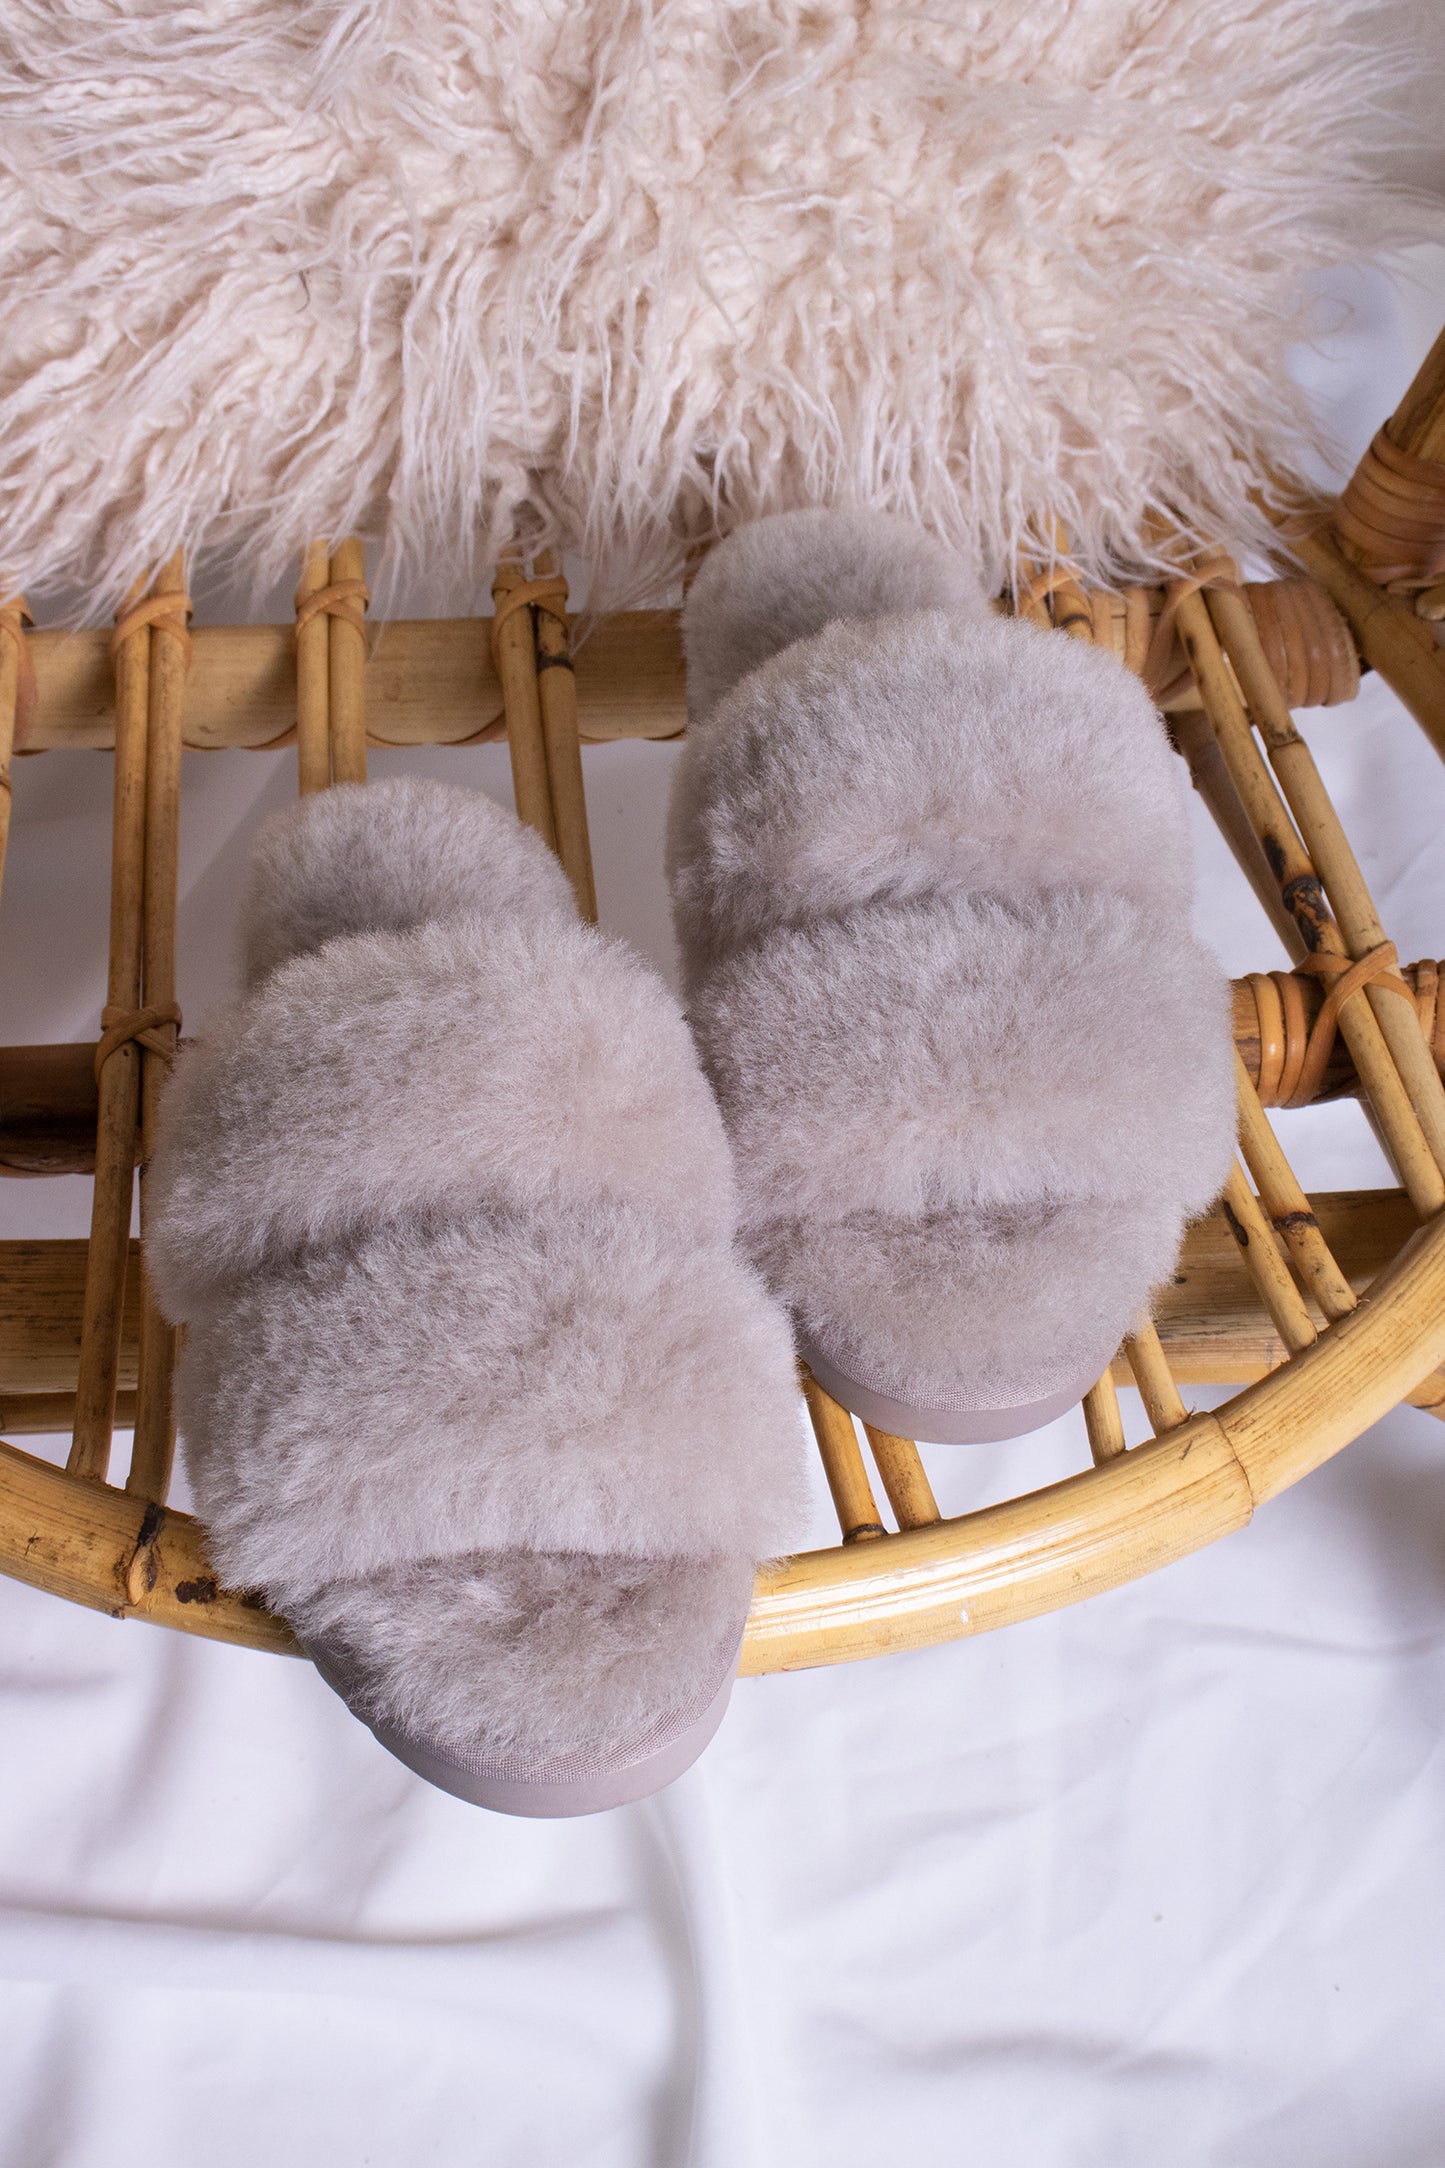 Jinx women's luxury sheepskin slippers in truffle with a double band and open toe from Pretty You London